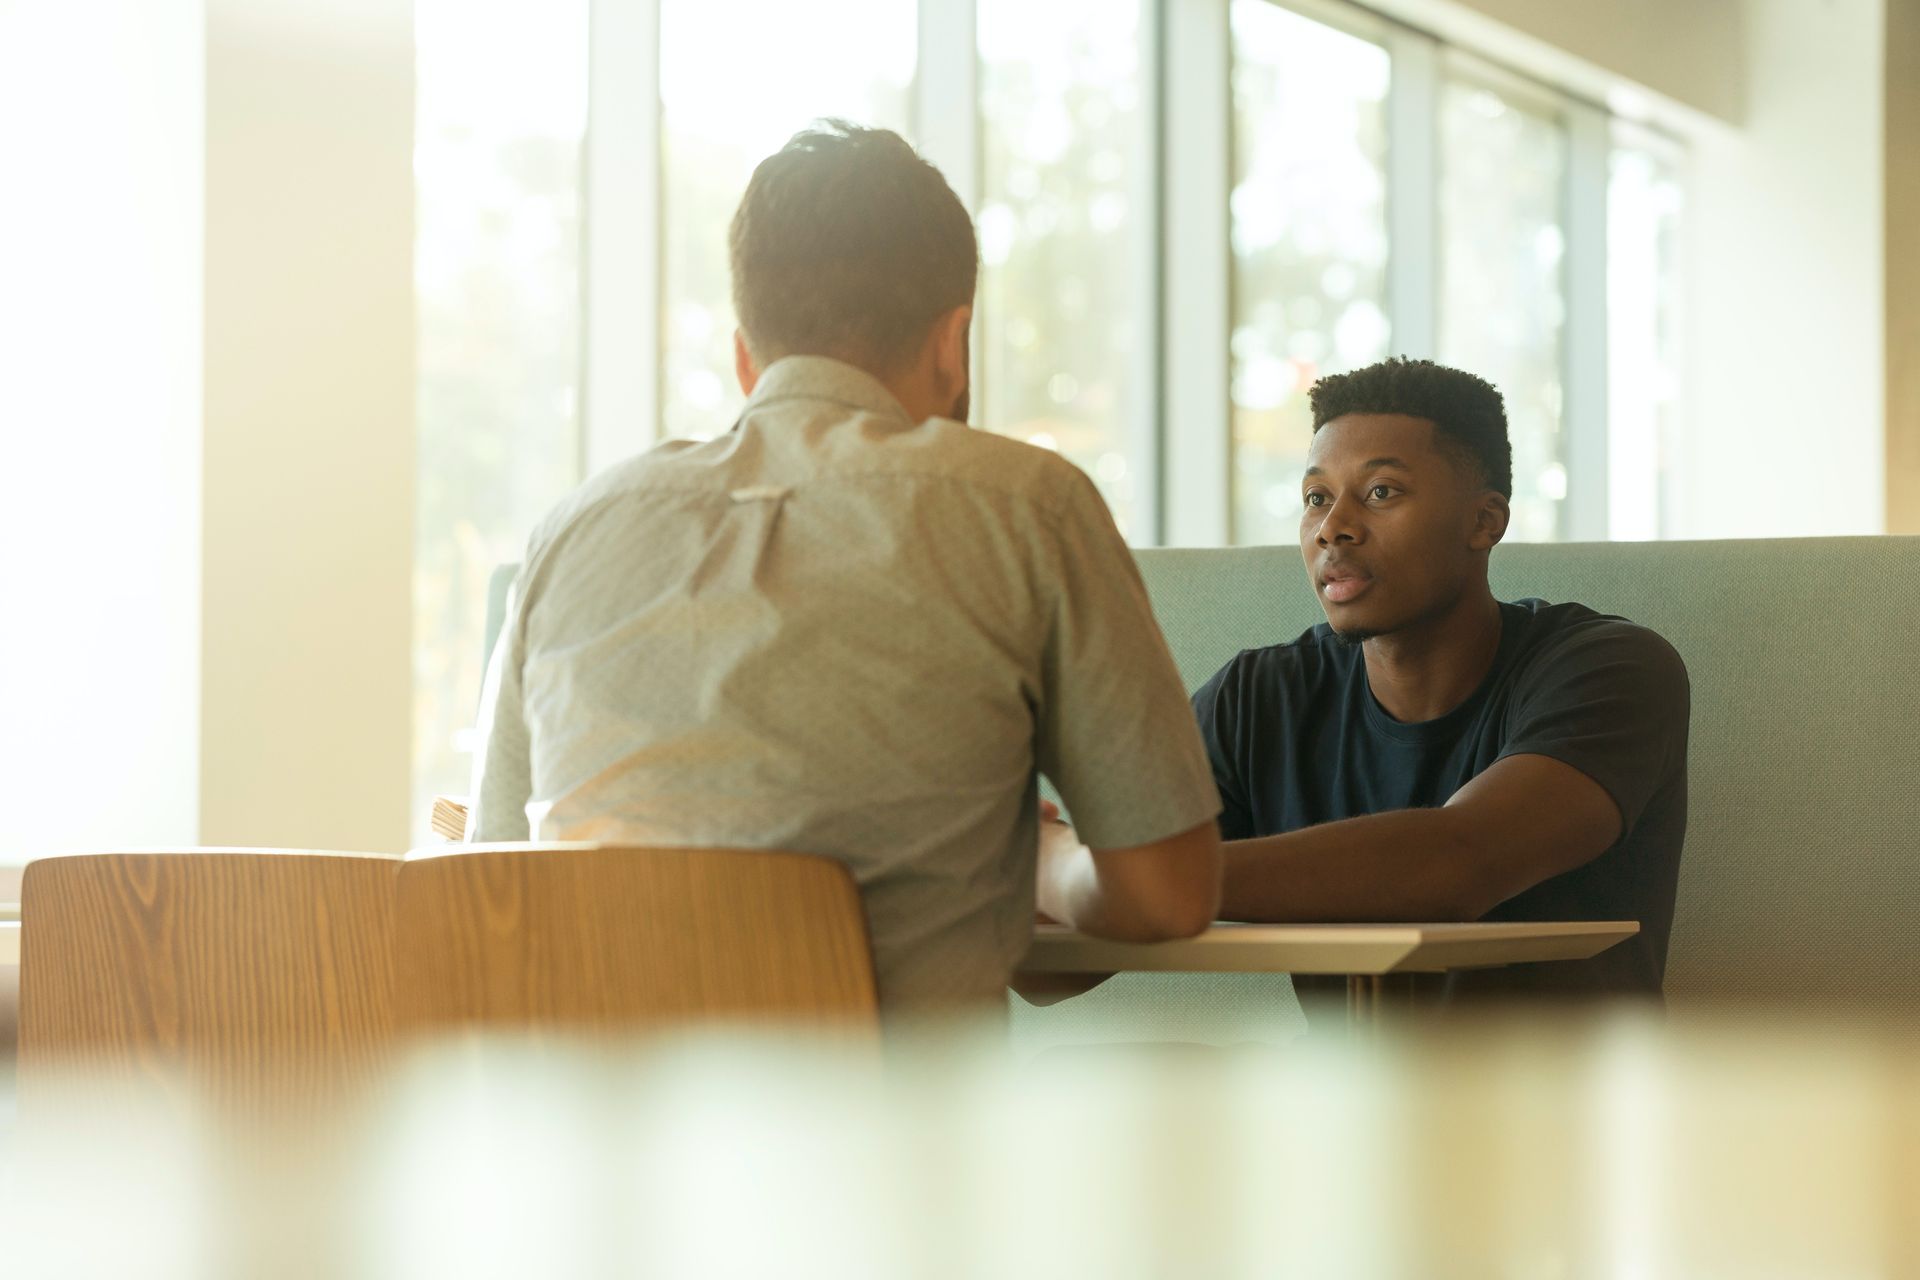 A young black man and young white man sit facing each other at a table is calm conversation